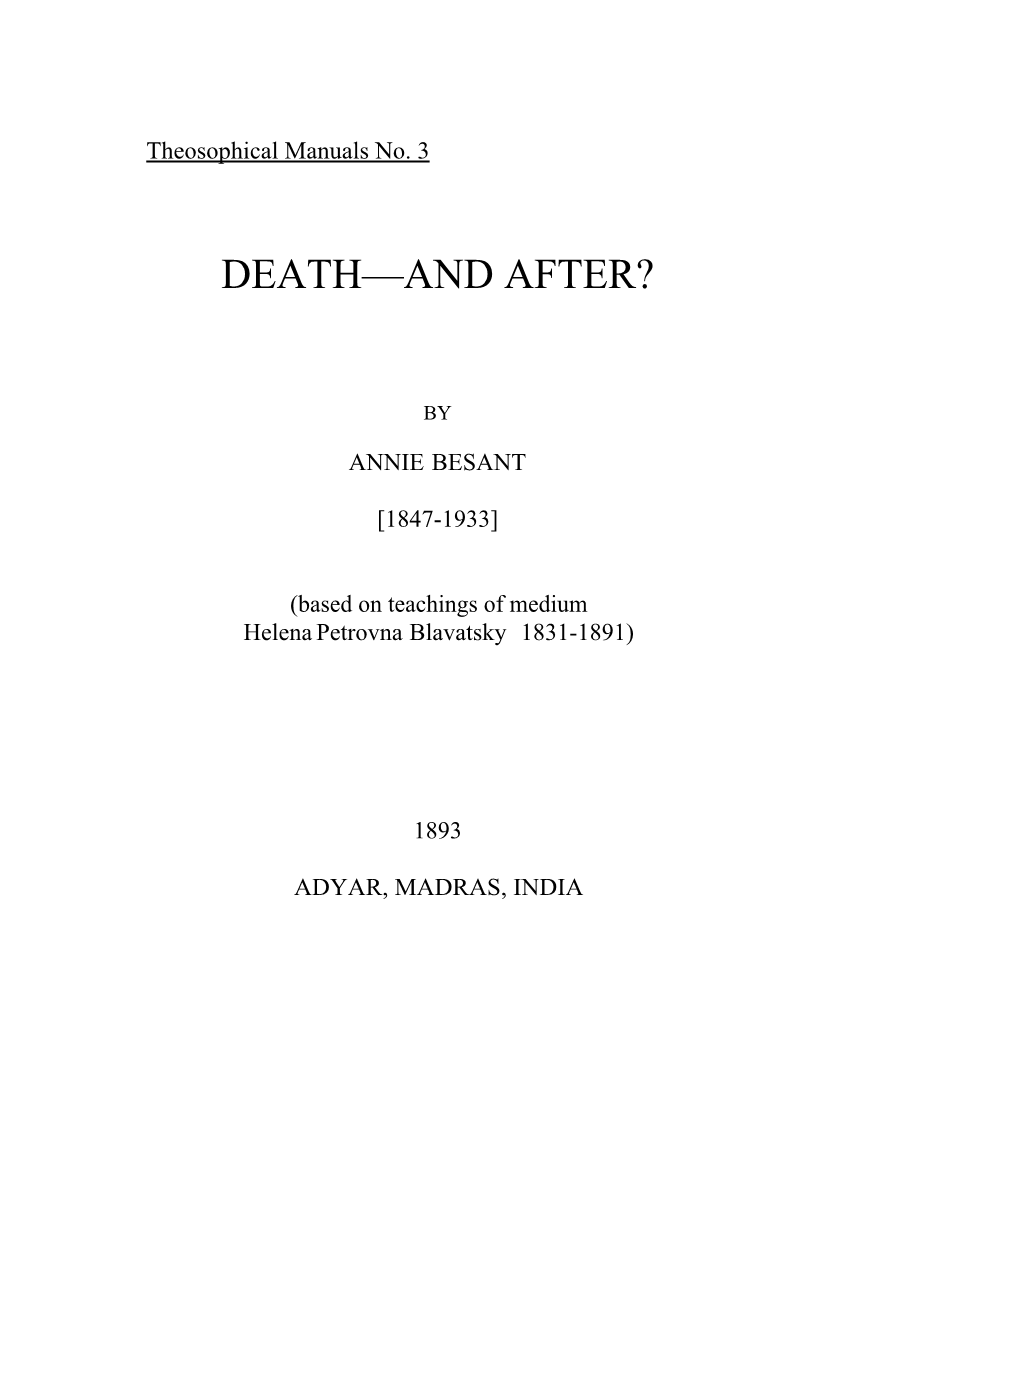 Death and After.Pdf